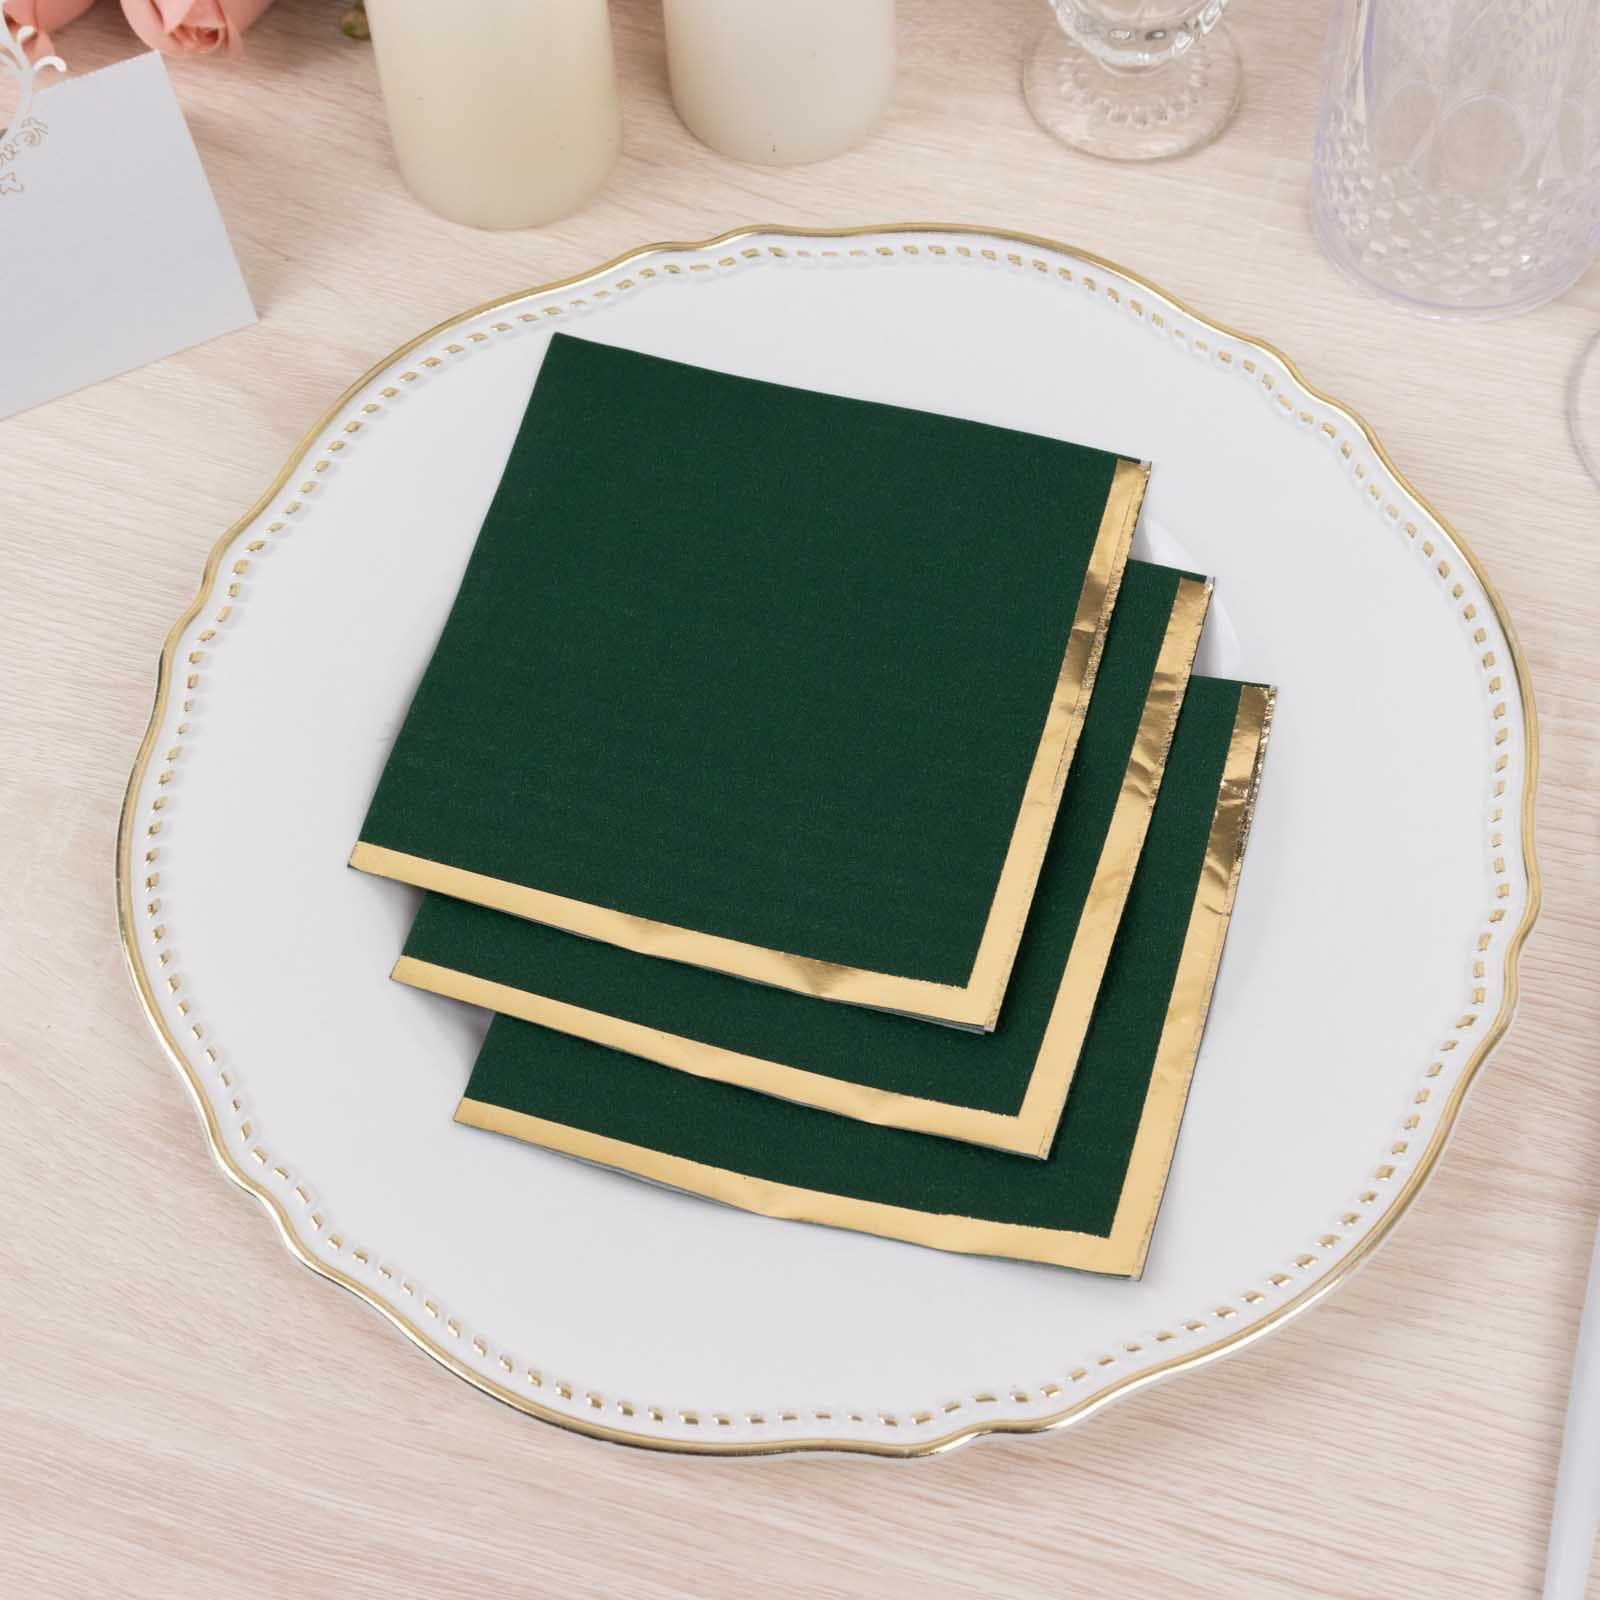 50 Disposable 2 Ply Soft Dinner Cocktail Paper Napkins with Gold Foil Edge